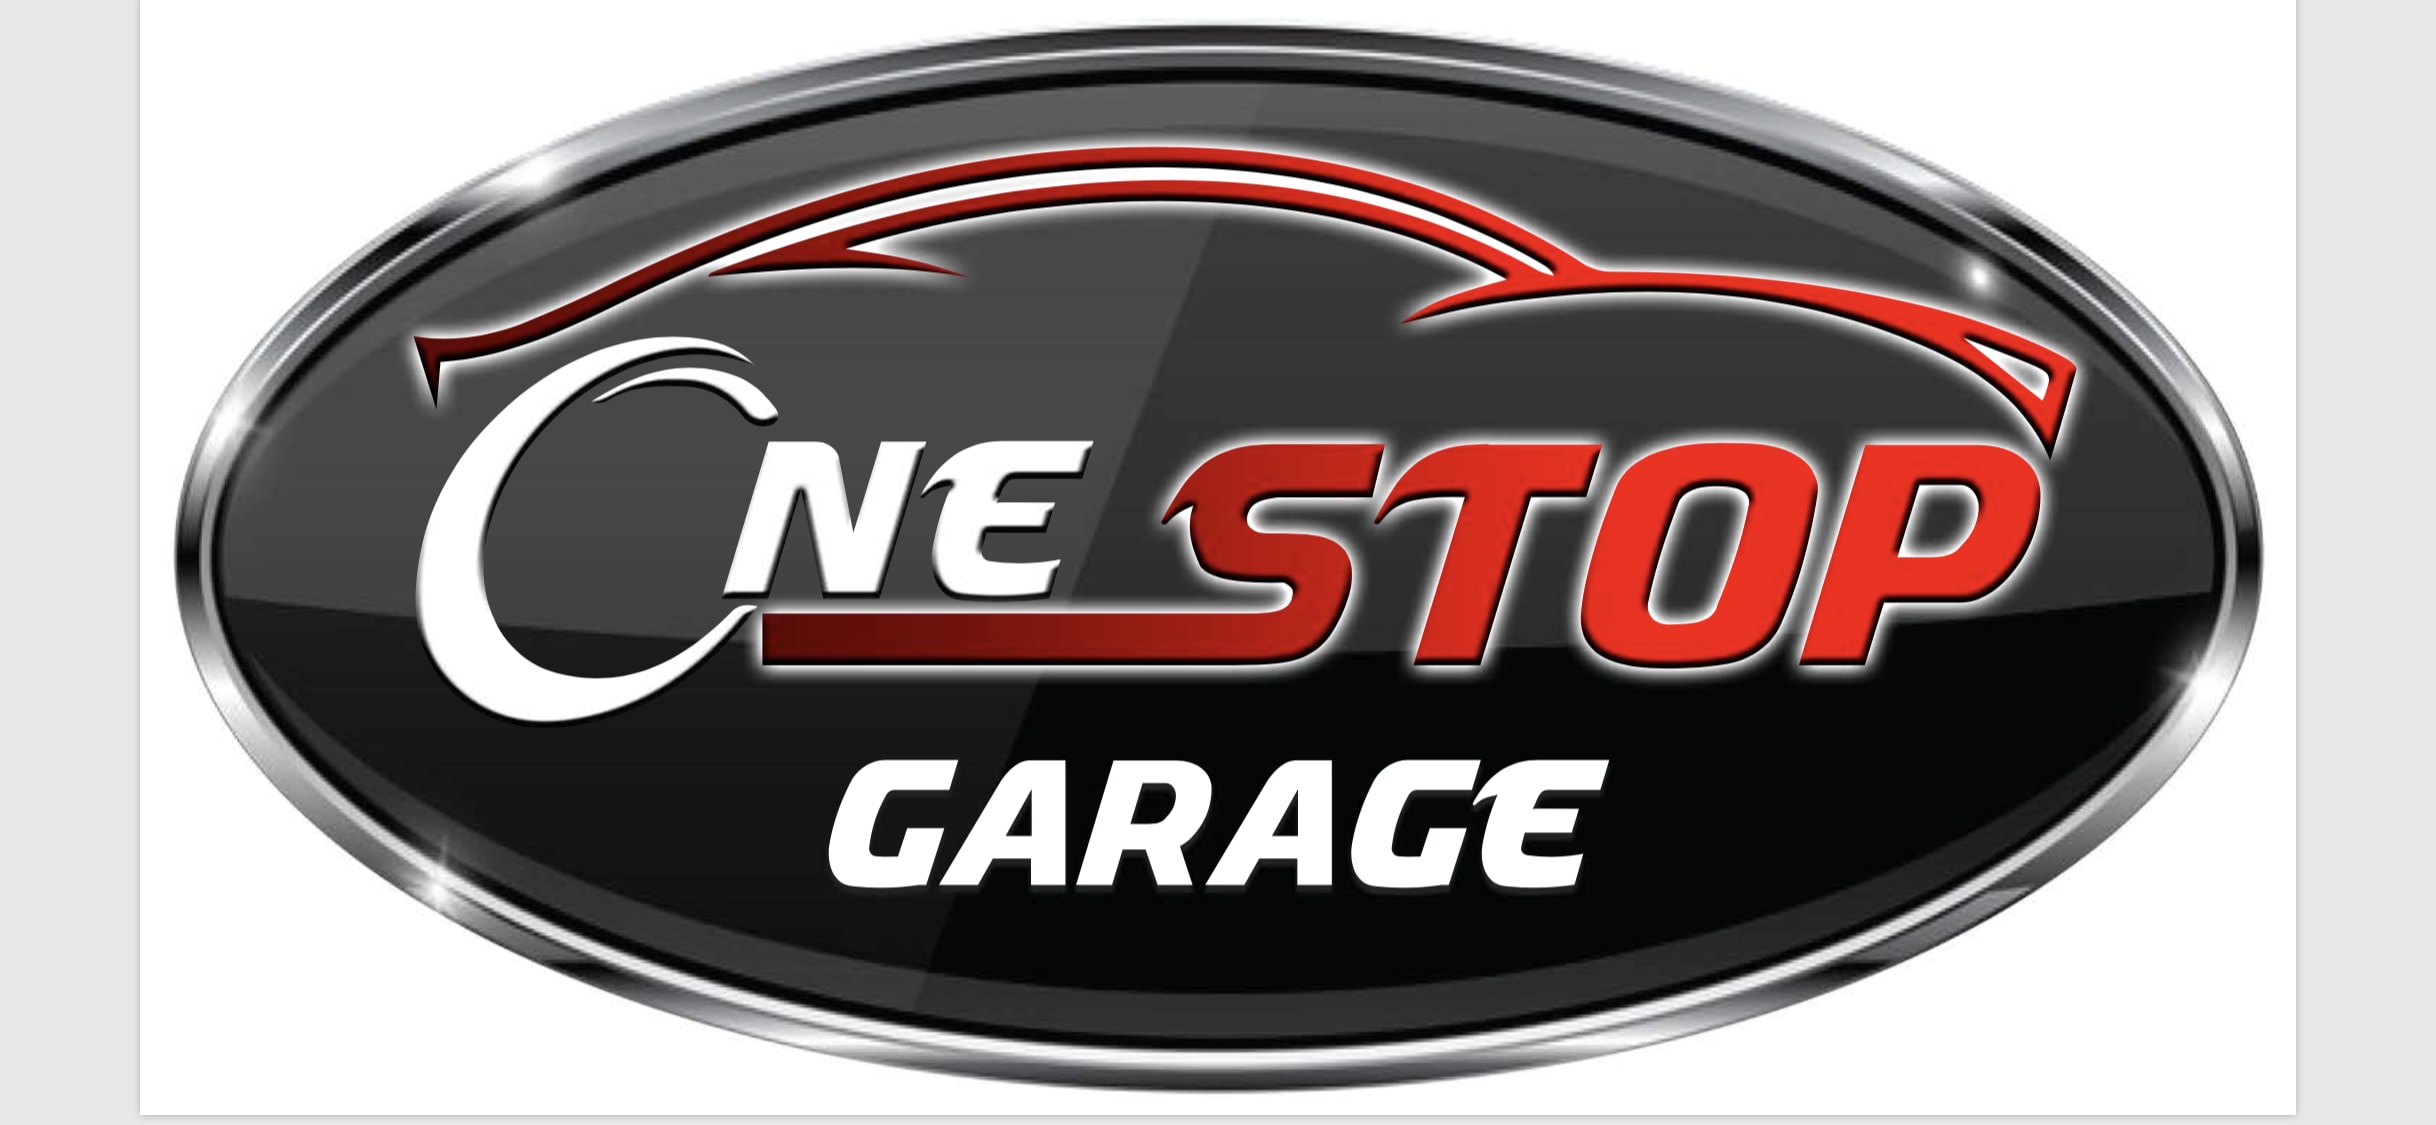 One Stop Garage Barry